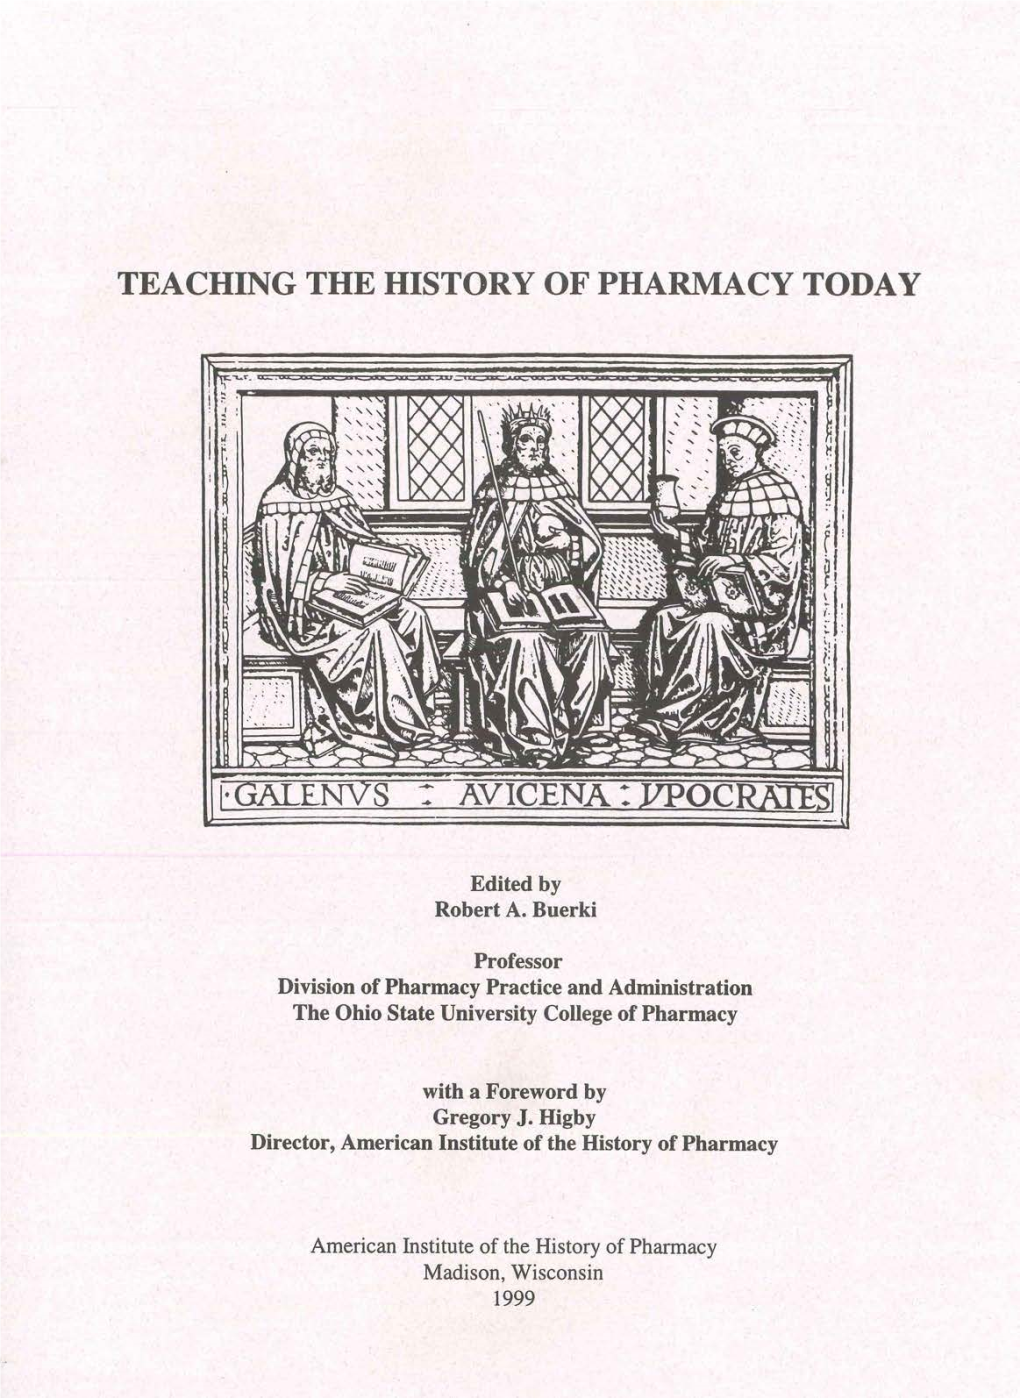 Teaching the History of Pharmacy Today: an Exploratory Session